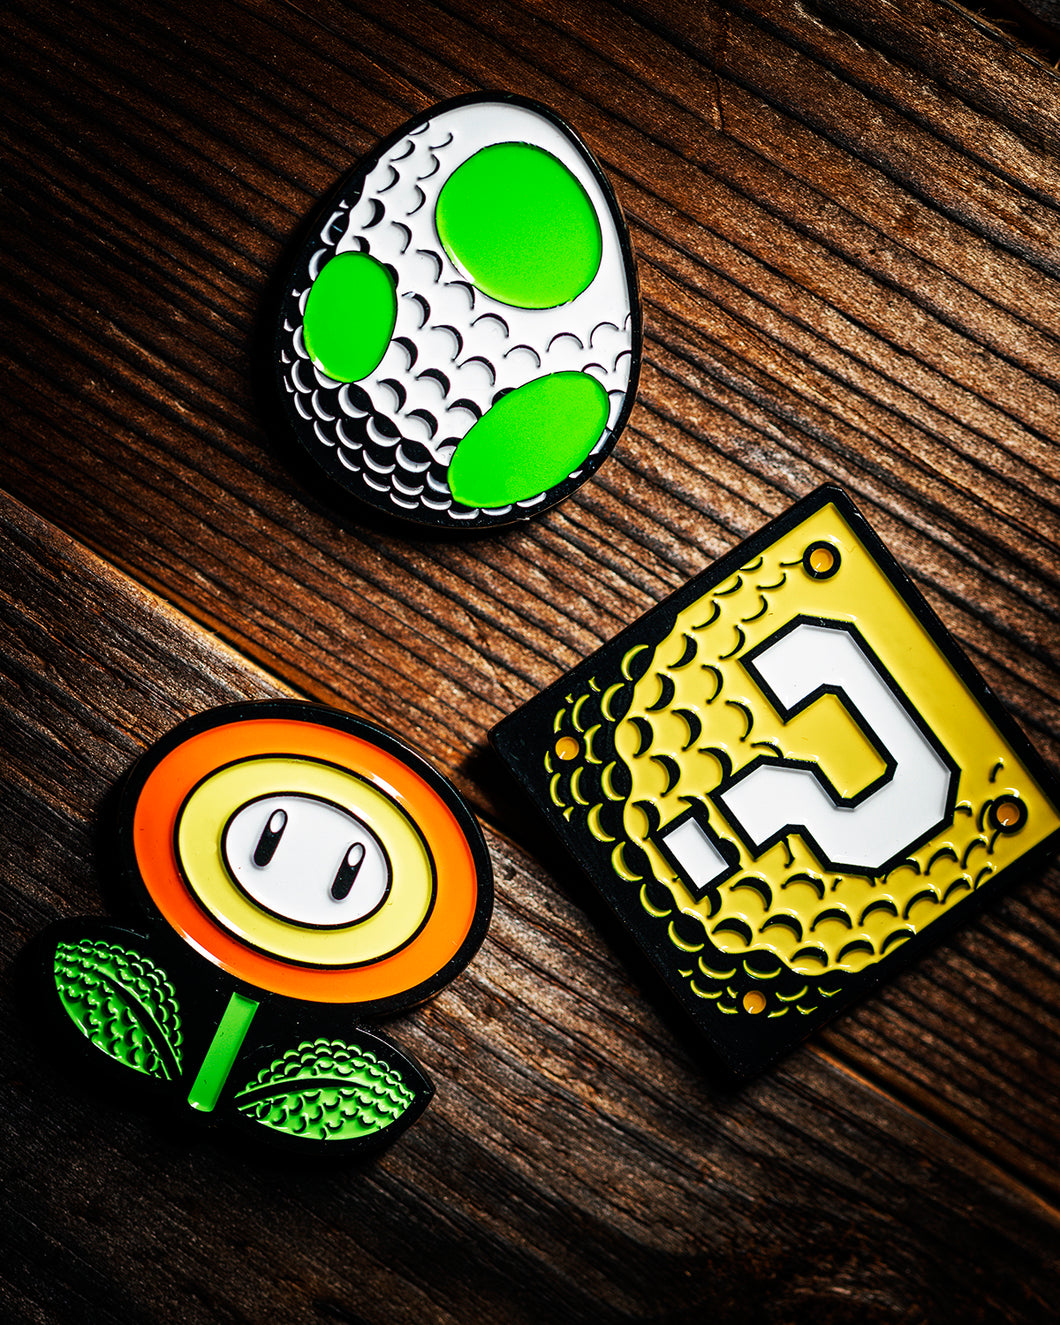 Let's-A-Go 3.0 Ball Markers